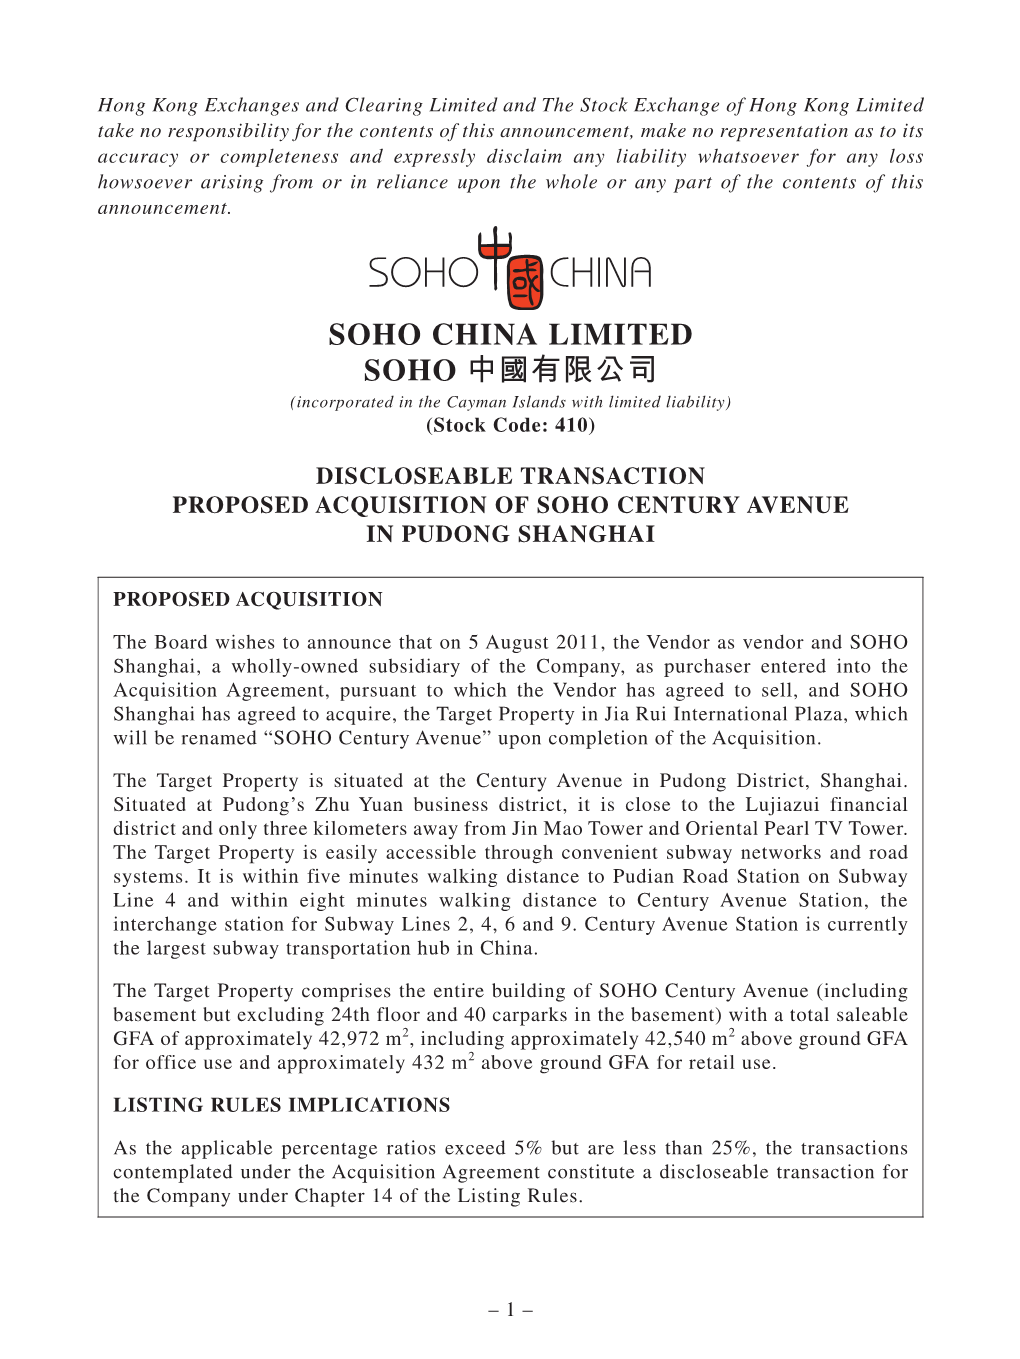 SOHO CHINA LIMITED SOHO 中國有限公司 (Incorporated in the Cayman Islands with Limited Liability) (Stock Code: 410)